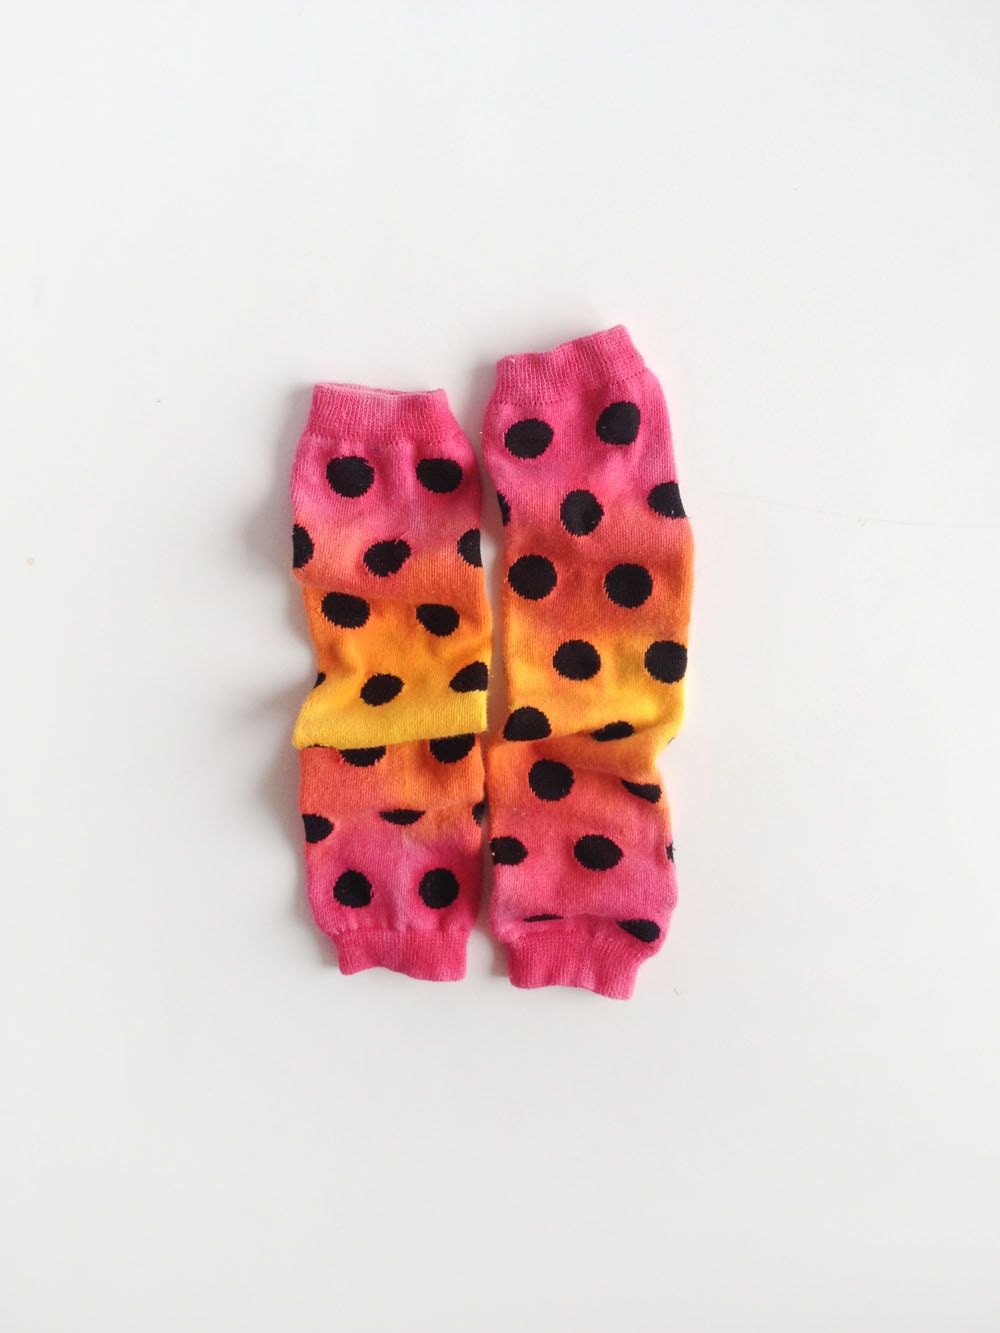 Snack Size Leg Candy Baby Leg Warmers - Pink, Orange, Yellow Ombre with Black Polka Dots, Hand Dyed - kakabaka